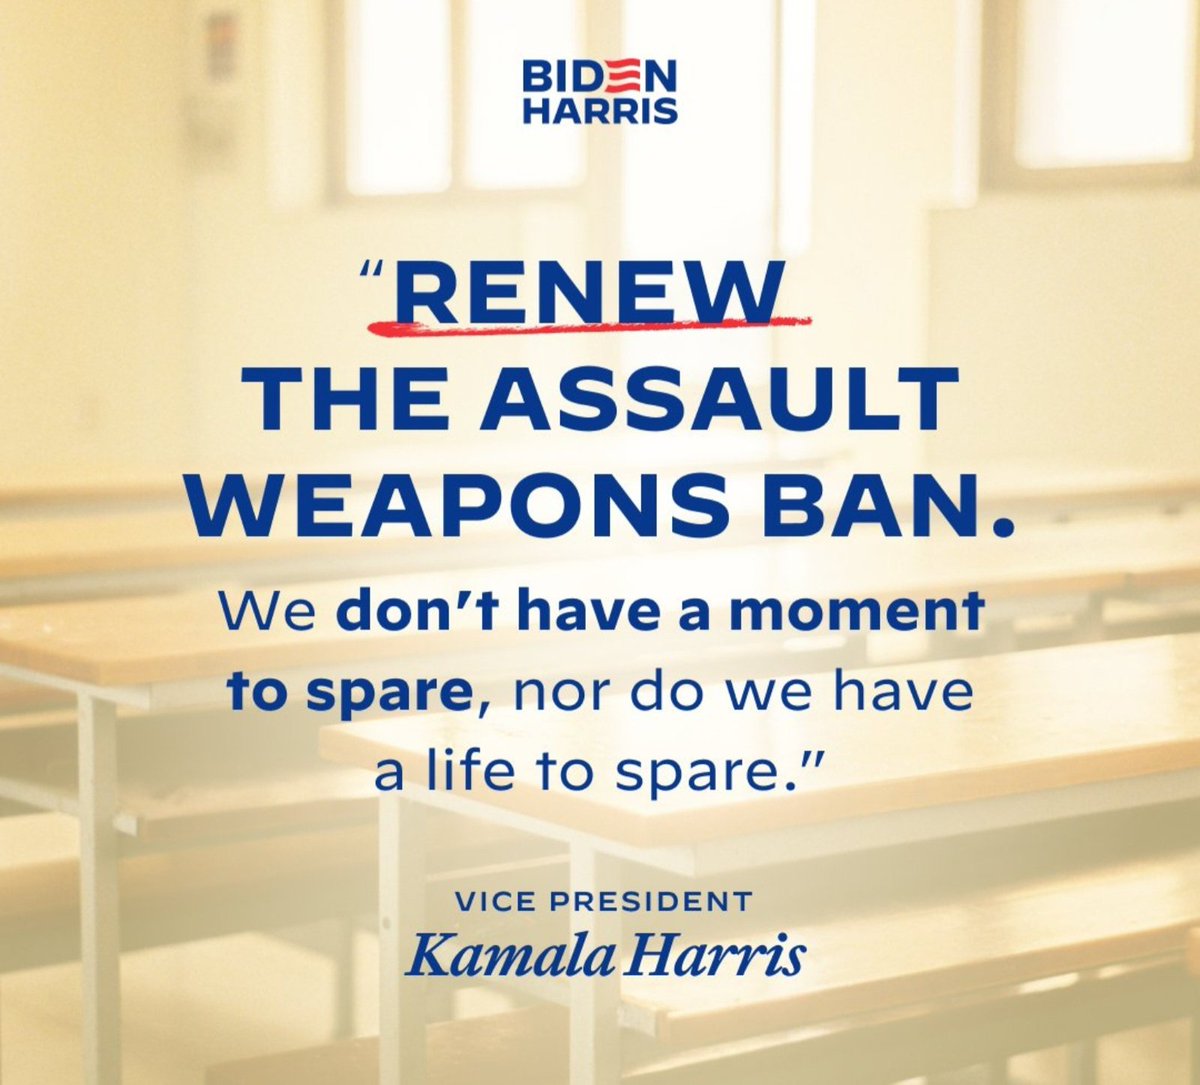 #DemVoice1 
There is a common-sense solution to the massacres and slaughters of innocent children and adults in America.  Here it is- there is NO other remedy that would be as profound as this - #BanAssaultWeaponsAGAIN  #BanHighCapacityMagazinesNOW